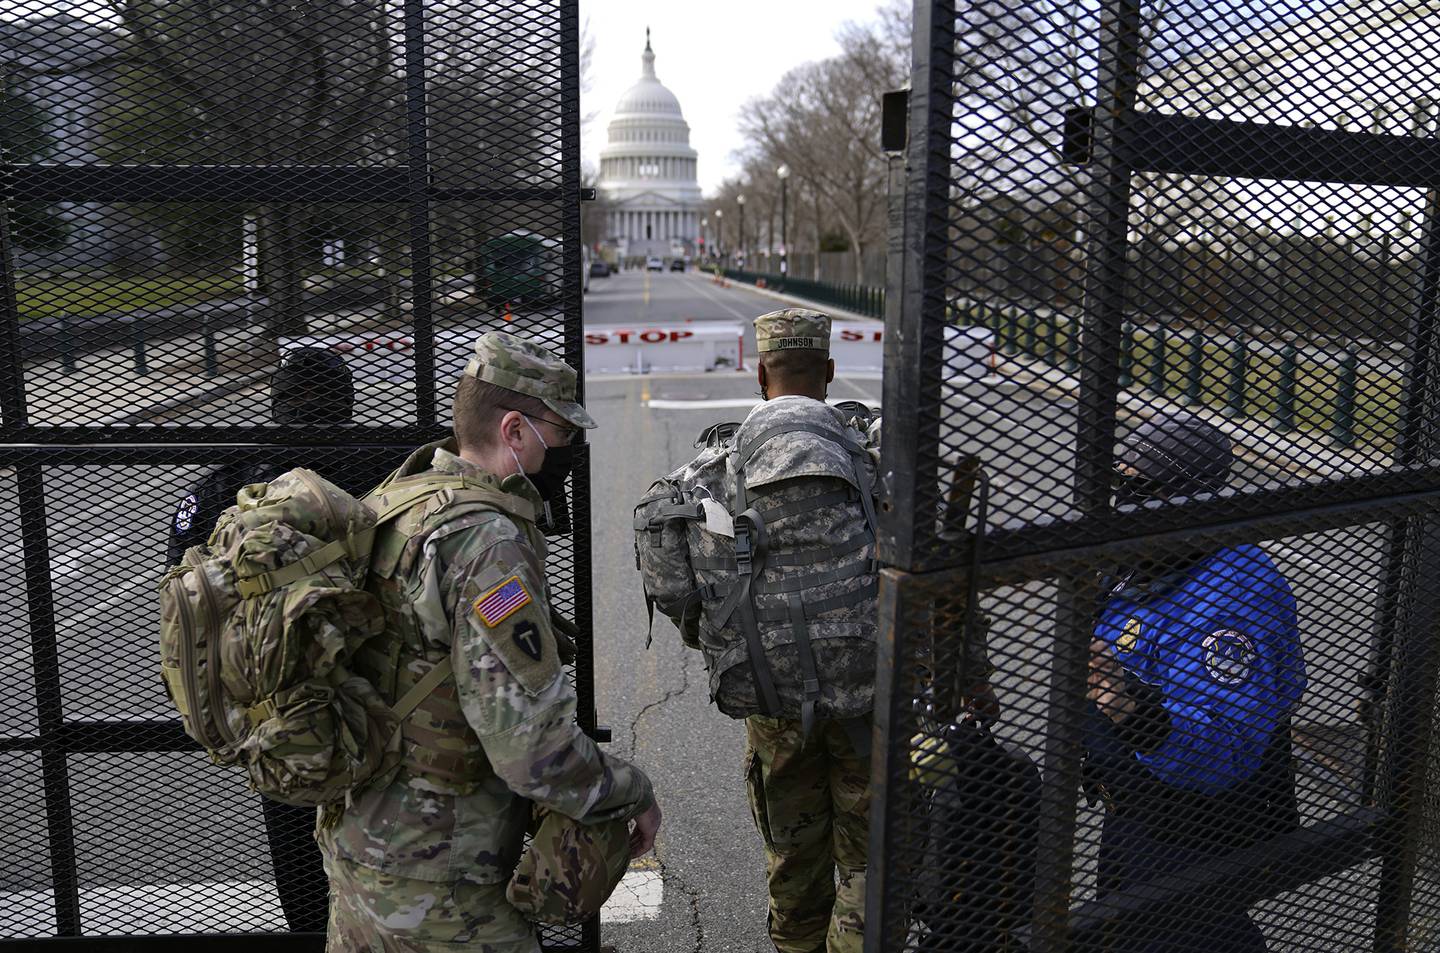 With the U.S. Capitol in the background, troops are let through a security gate on Saturday, Jan. 16, 2021, in Washington as security is increased ahead of the inauguration of President-elect Joe Biden and Vice President-elect Kamala Harris.